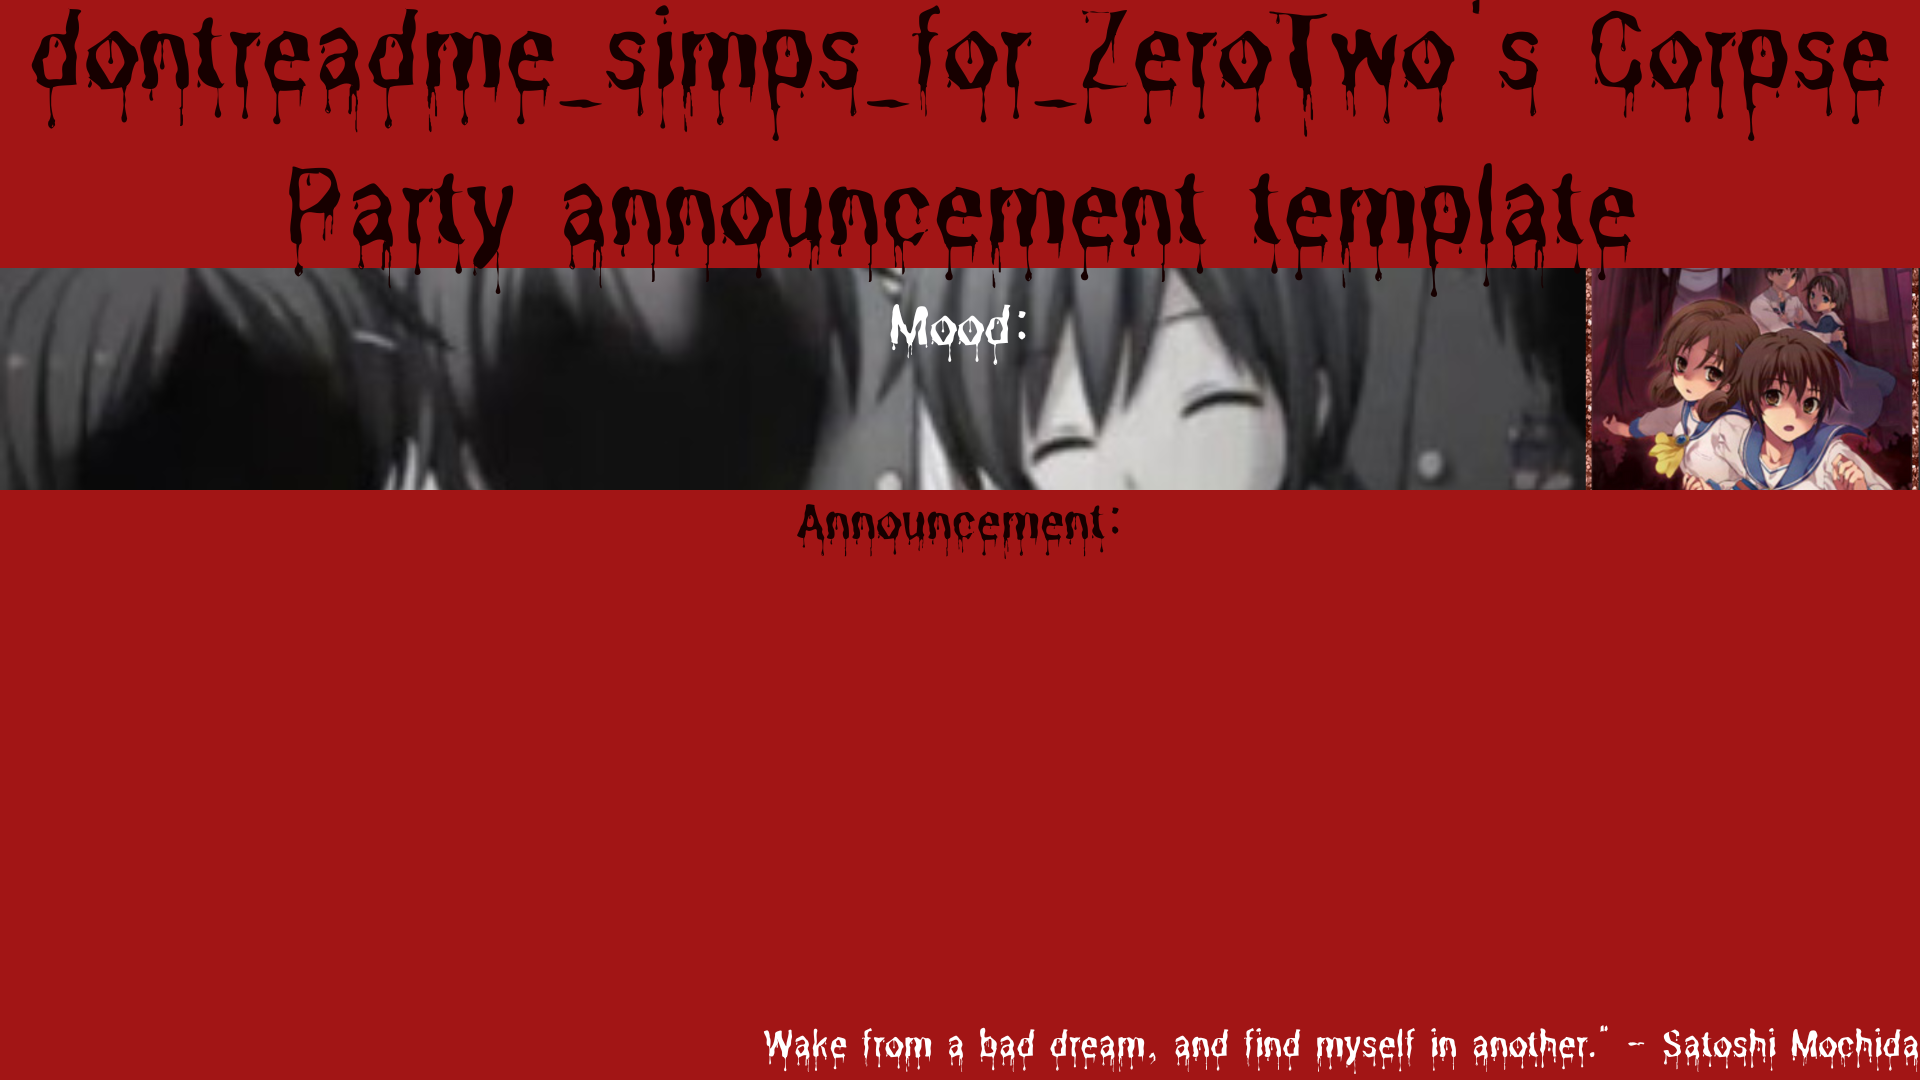 High Quality drm's corpse party template announcement Blank Meme Template